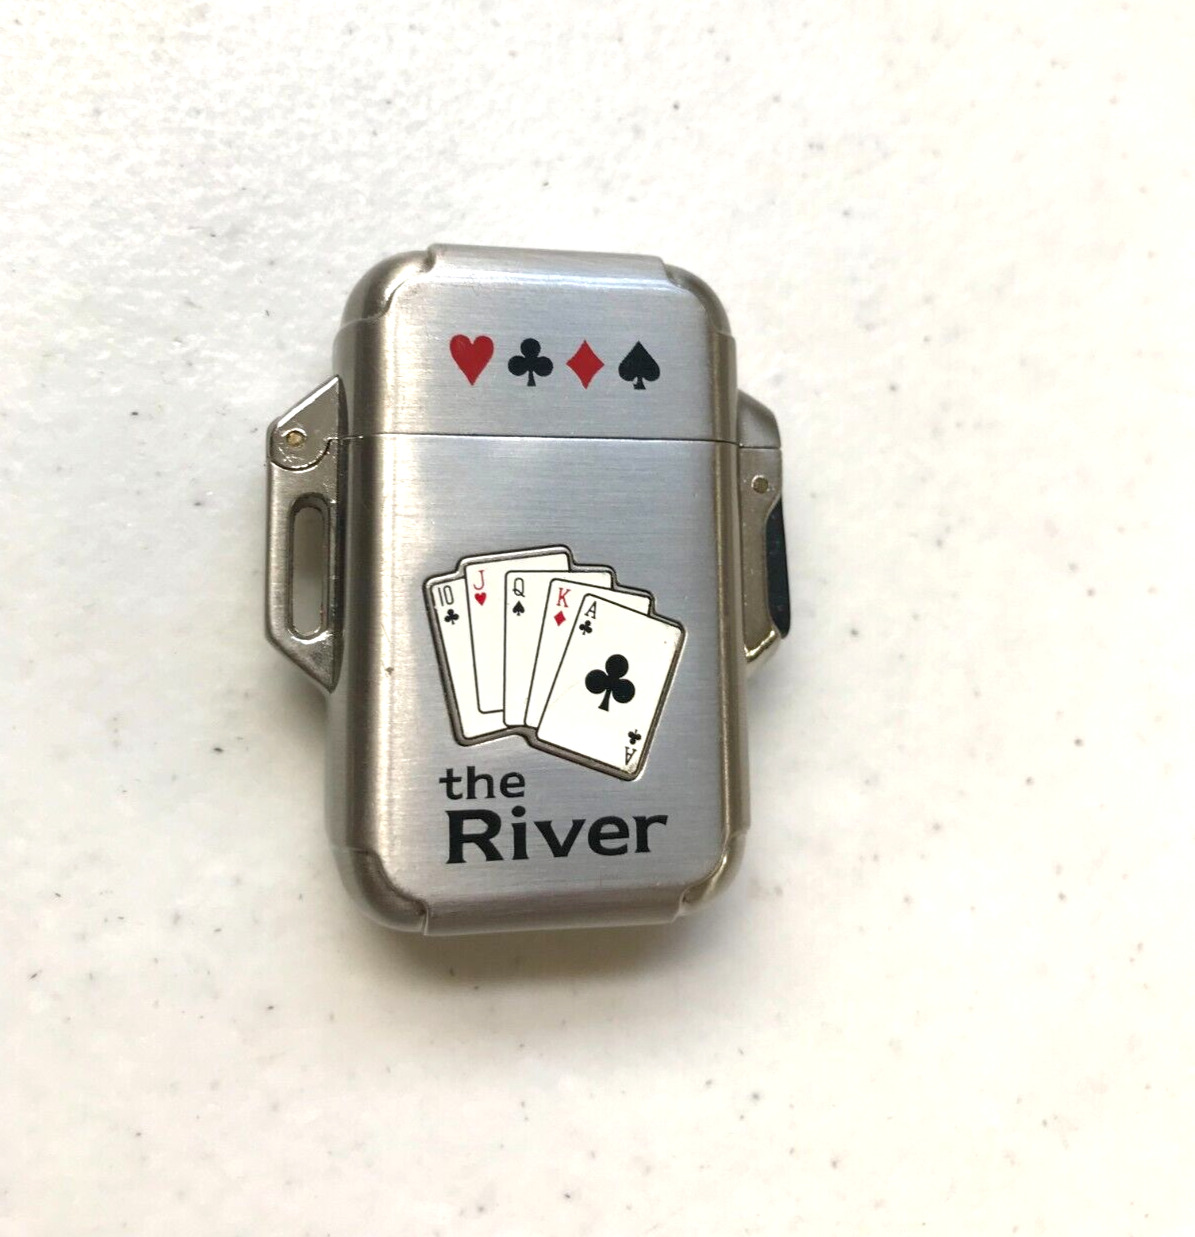 Stainless Butane Lighter "the River" With Card Suits